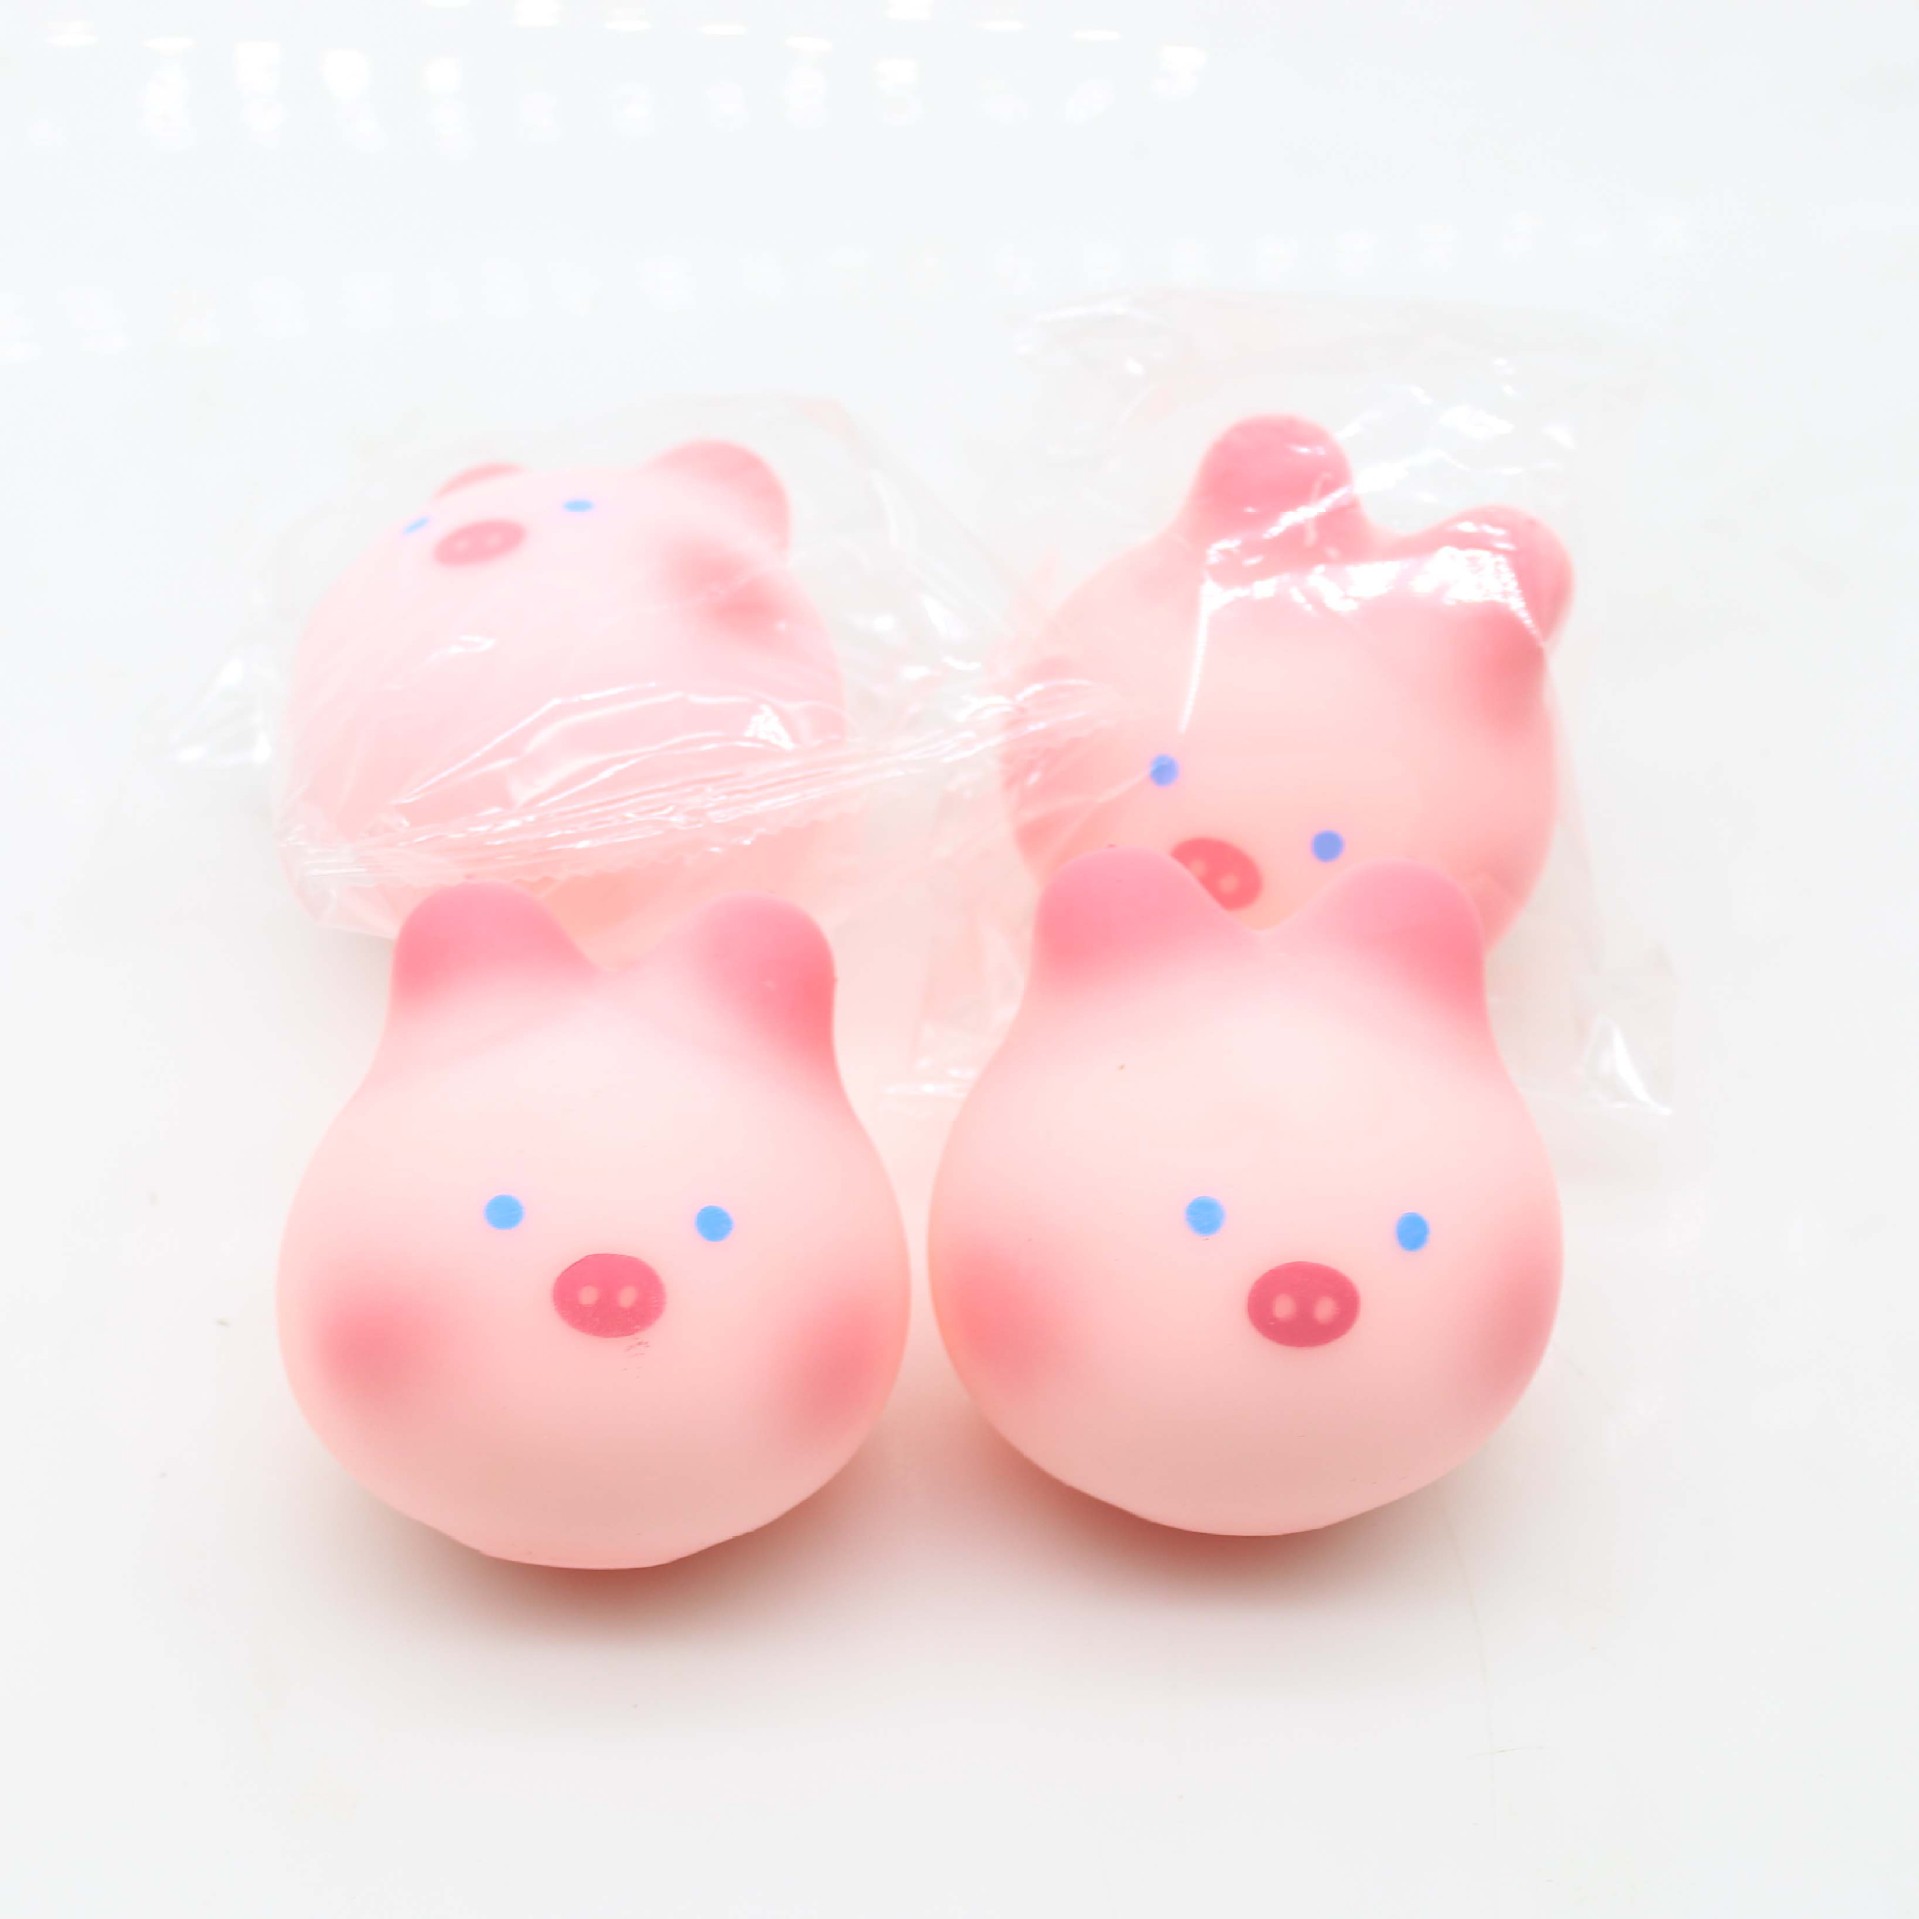 lusisangzhi same style cherry blossom pig rabbit squeezing toy rabbit pig decompression toy xiaohongshu internet celebrity popular small play